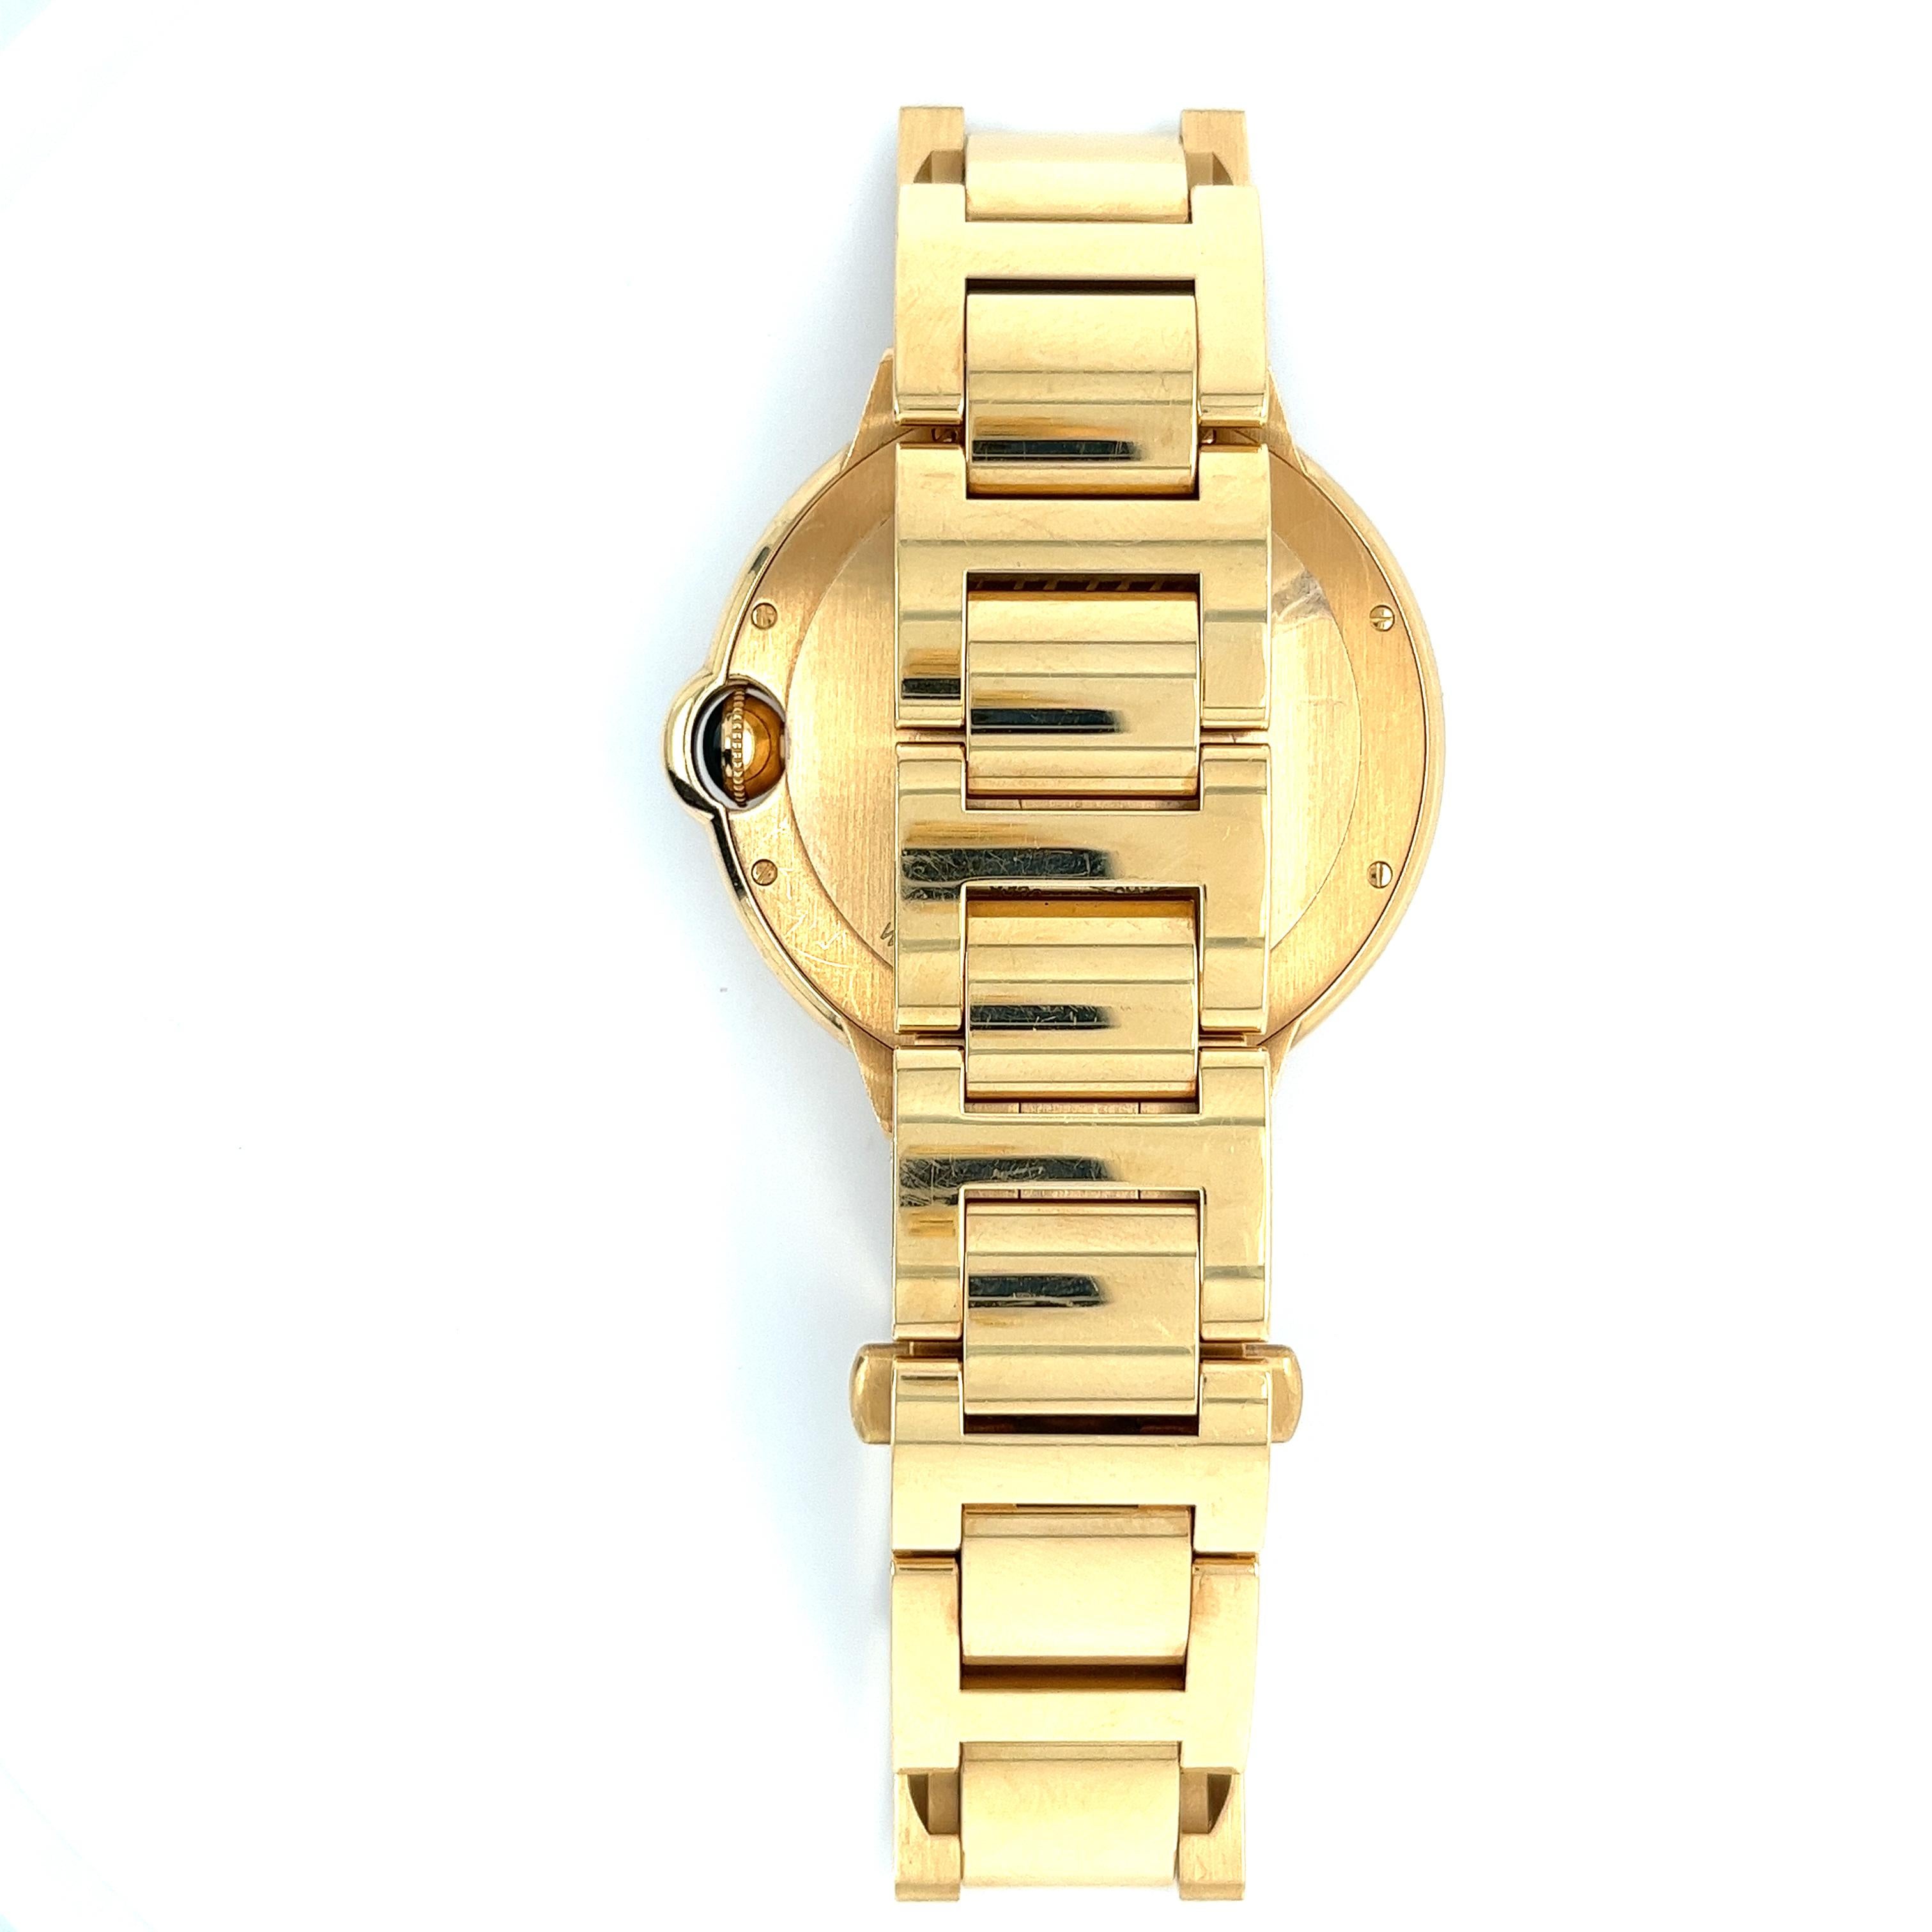 Cartier Ballon Bleu Jumbo Large Size Mens Watch in 18k Gold with Box/Papers In Excellent Condition For Sale In Miami, FL